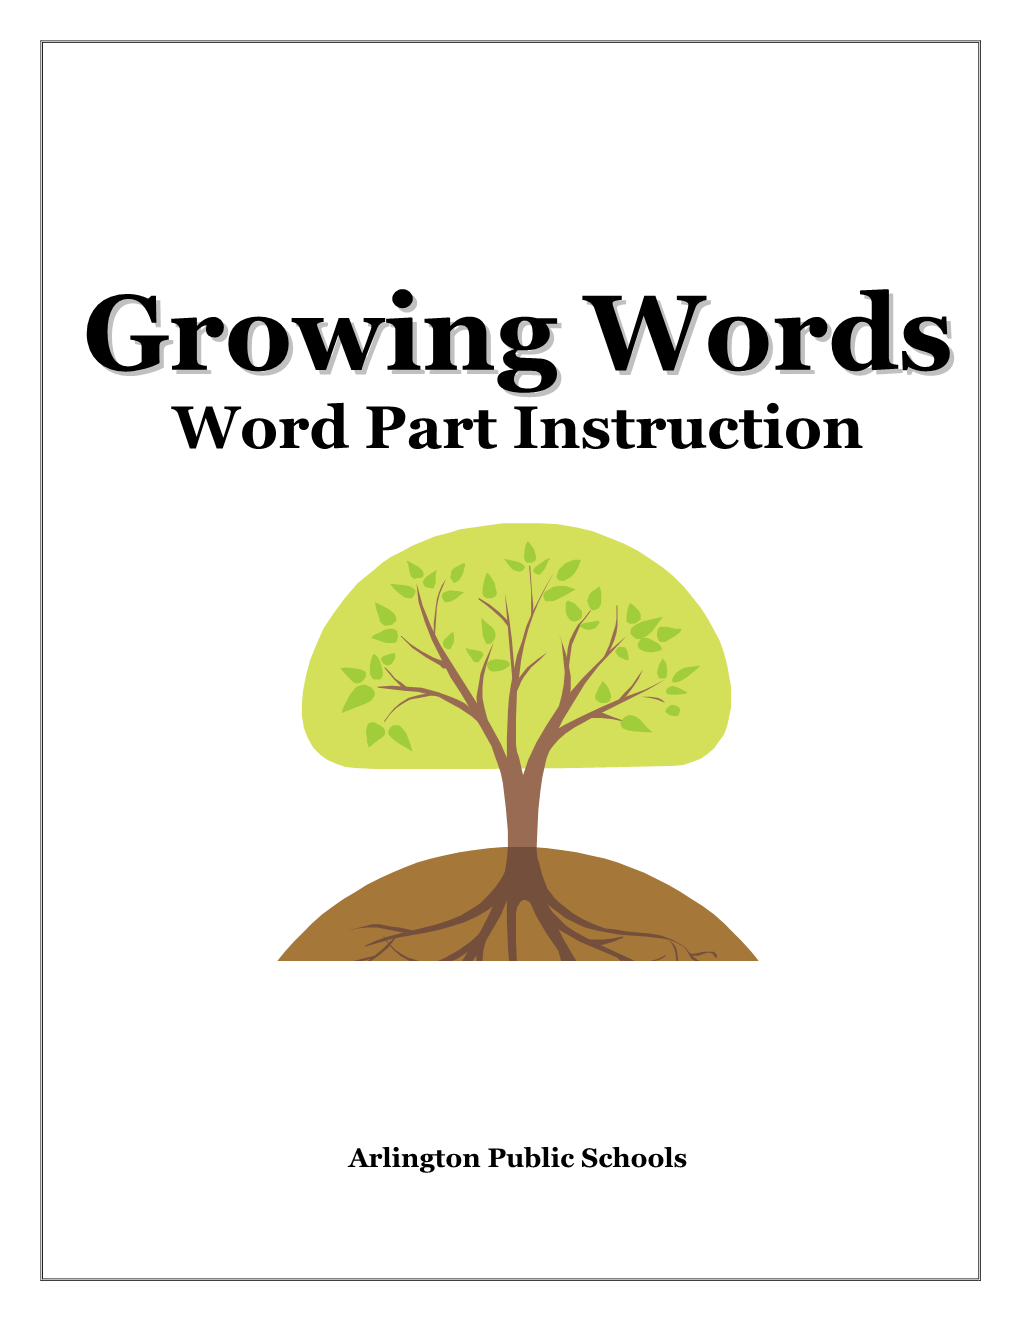 Growing Words: Word Part Instruction